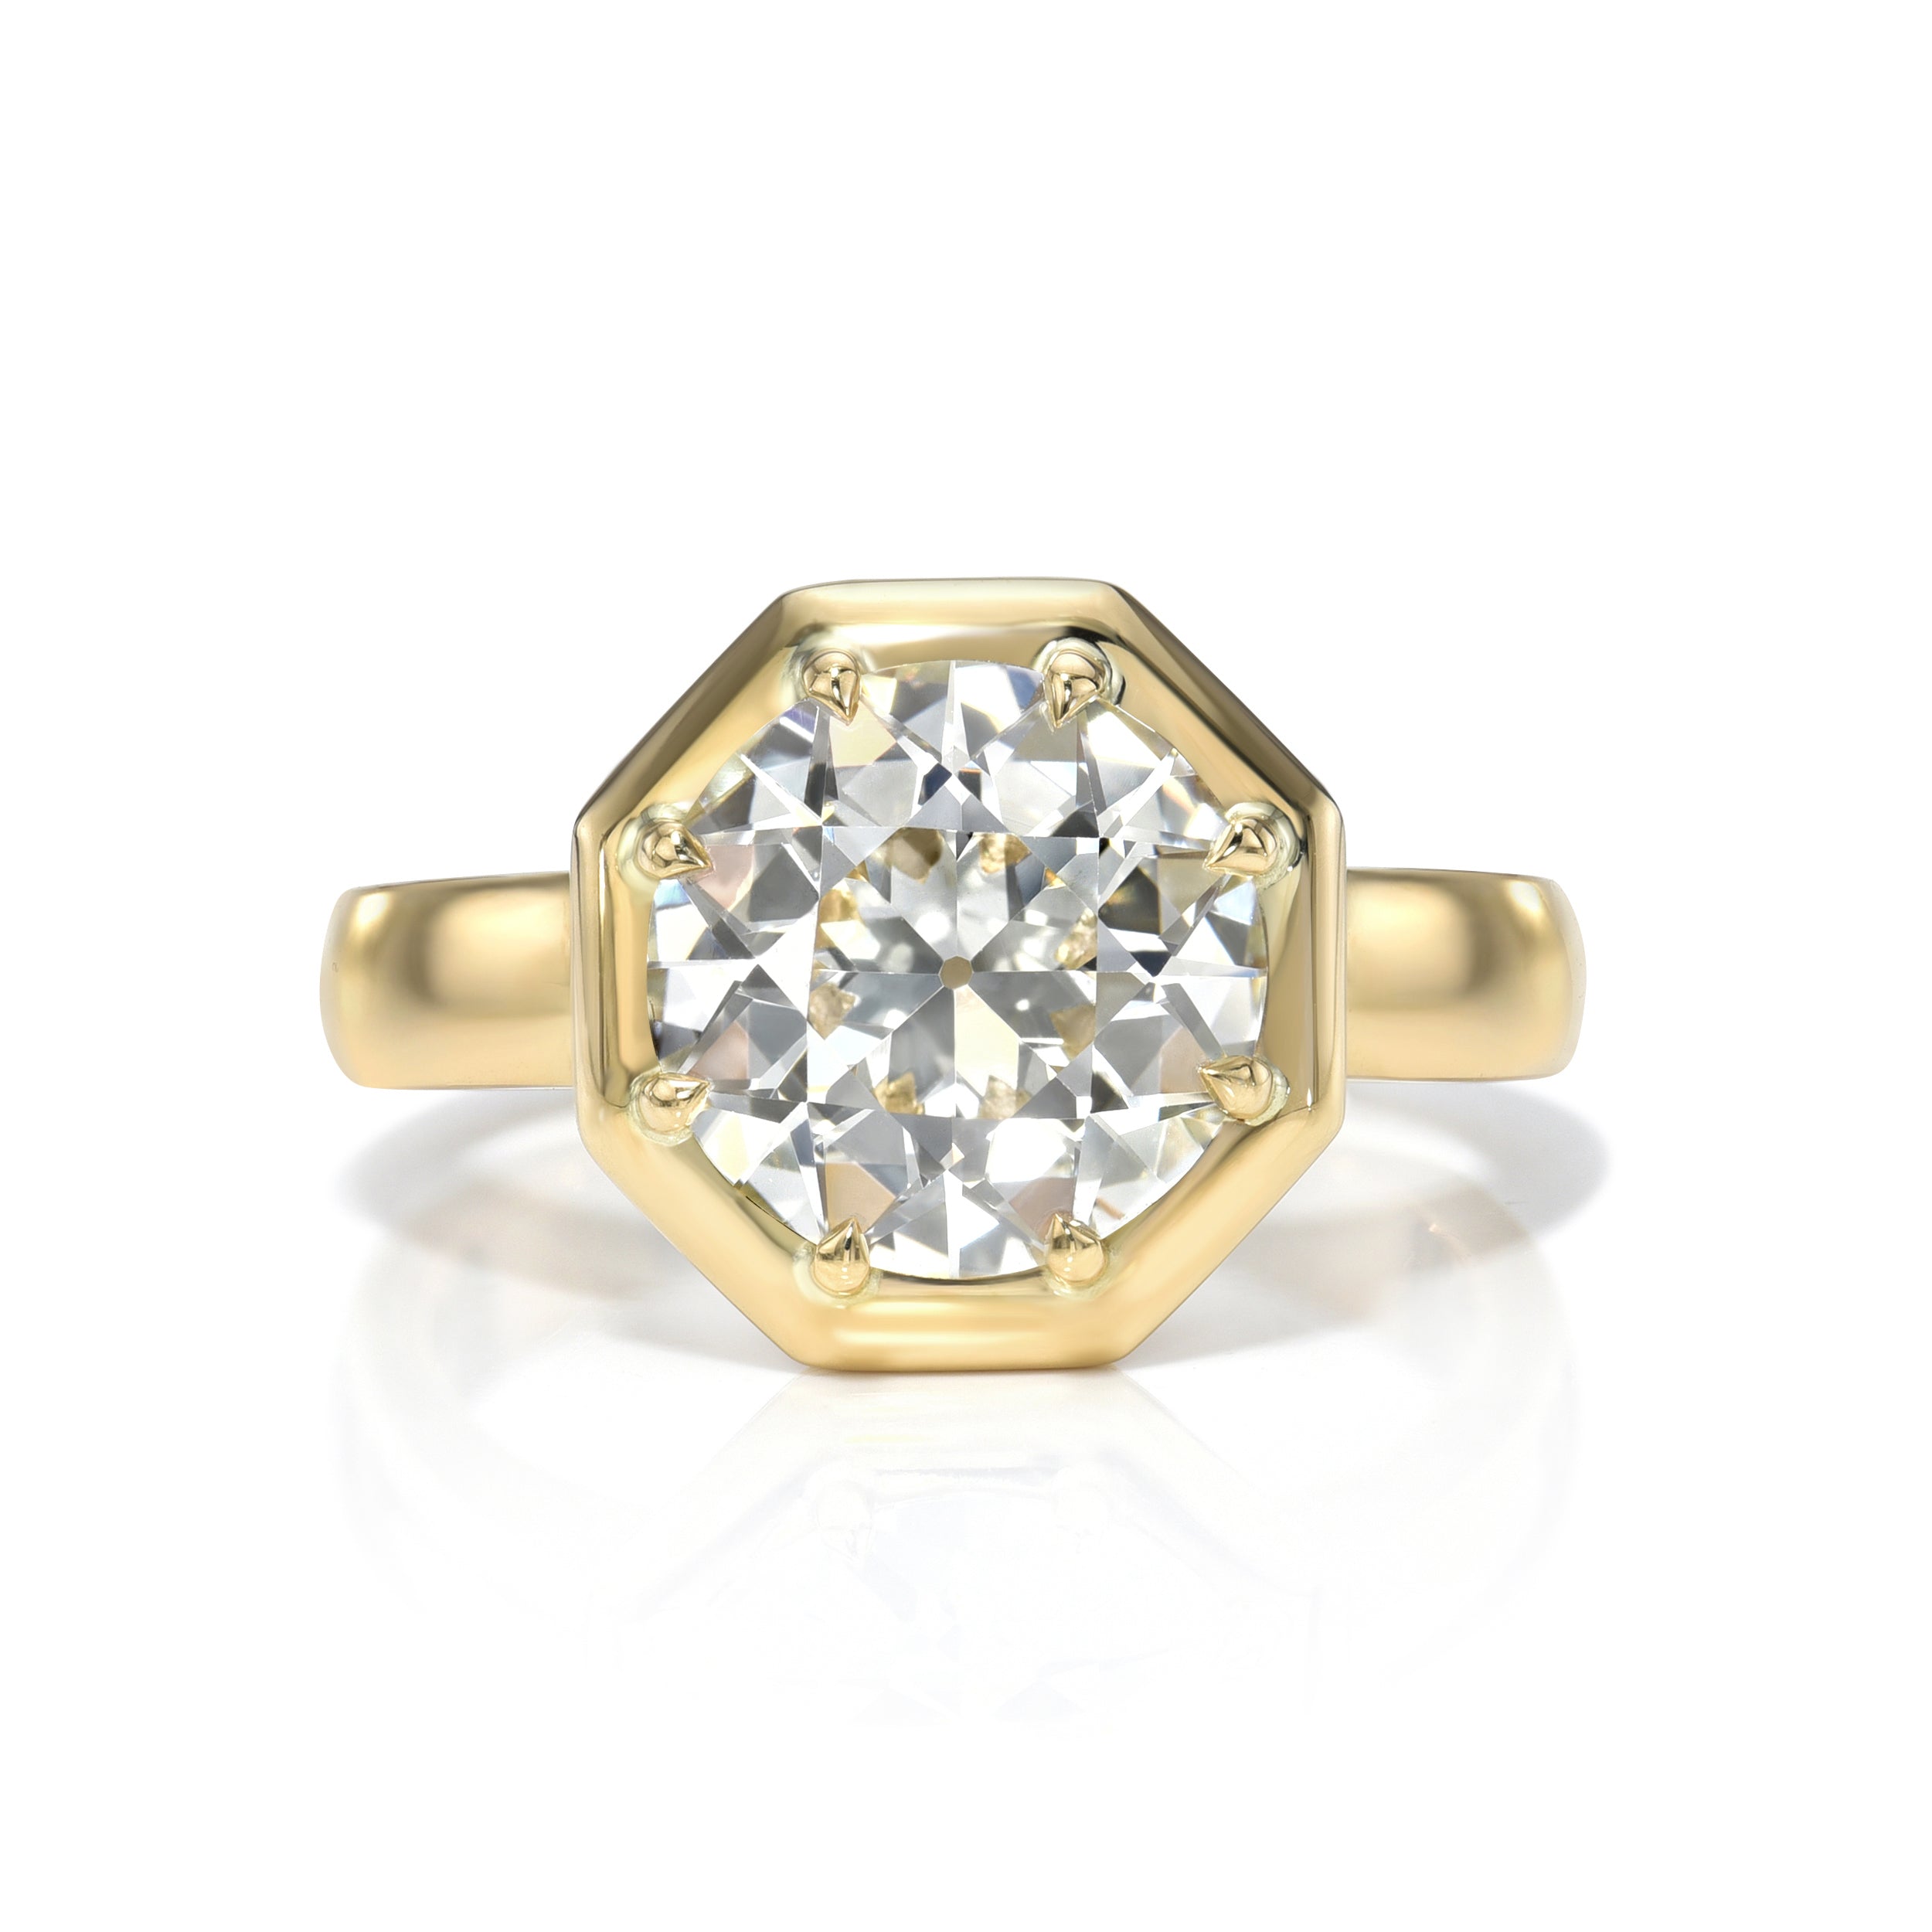 SINGLE STONE LOLA RING featuring 2.90ct L/VVS2 GIA certified old European cut diamond prong set in a handcrafted 18K yellow gold mounting.